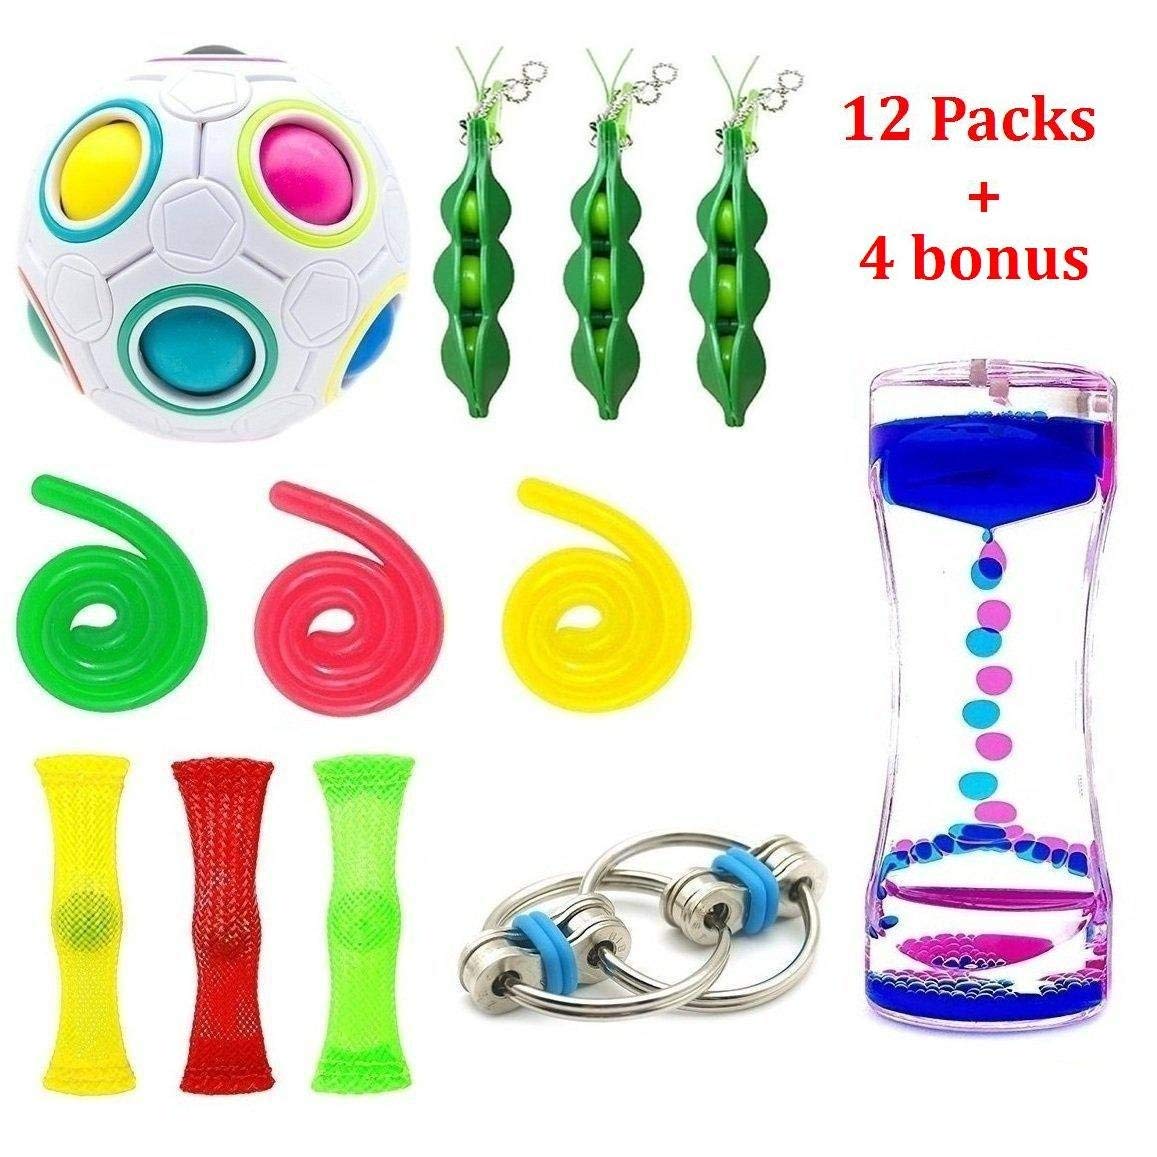 SpringFly 16 Pack Bundle Sensory Toys-Liquid Motion Timer/Rainbow Magic Balls/Bike Chain/Mesh And Marble Toy/Squeeze-a-Bean Soybean/Stretch String Toy for ADD ADHD Stress Relax - Click Image to Close